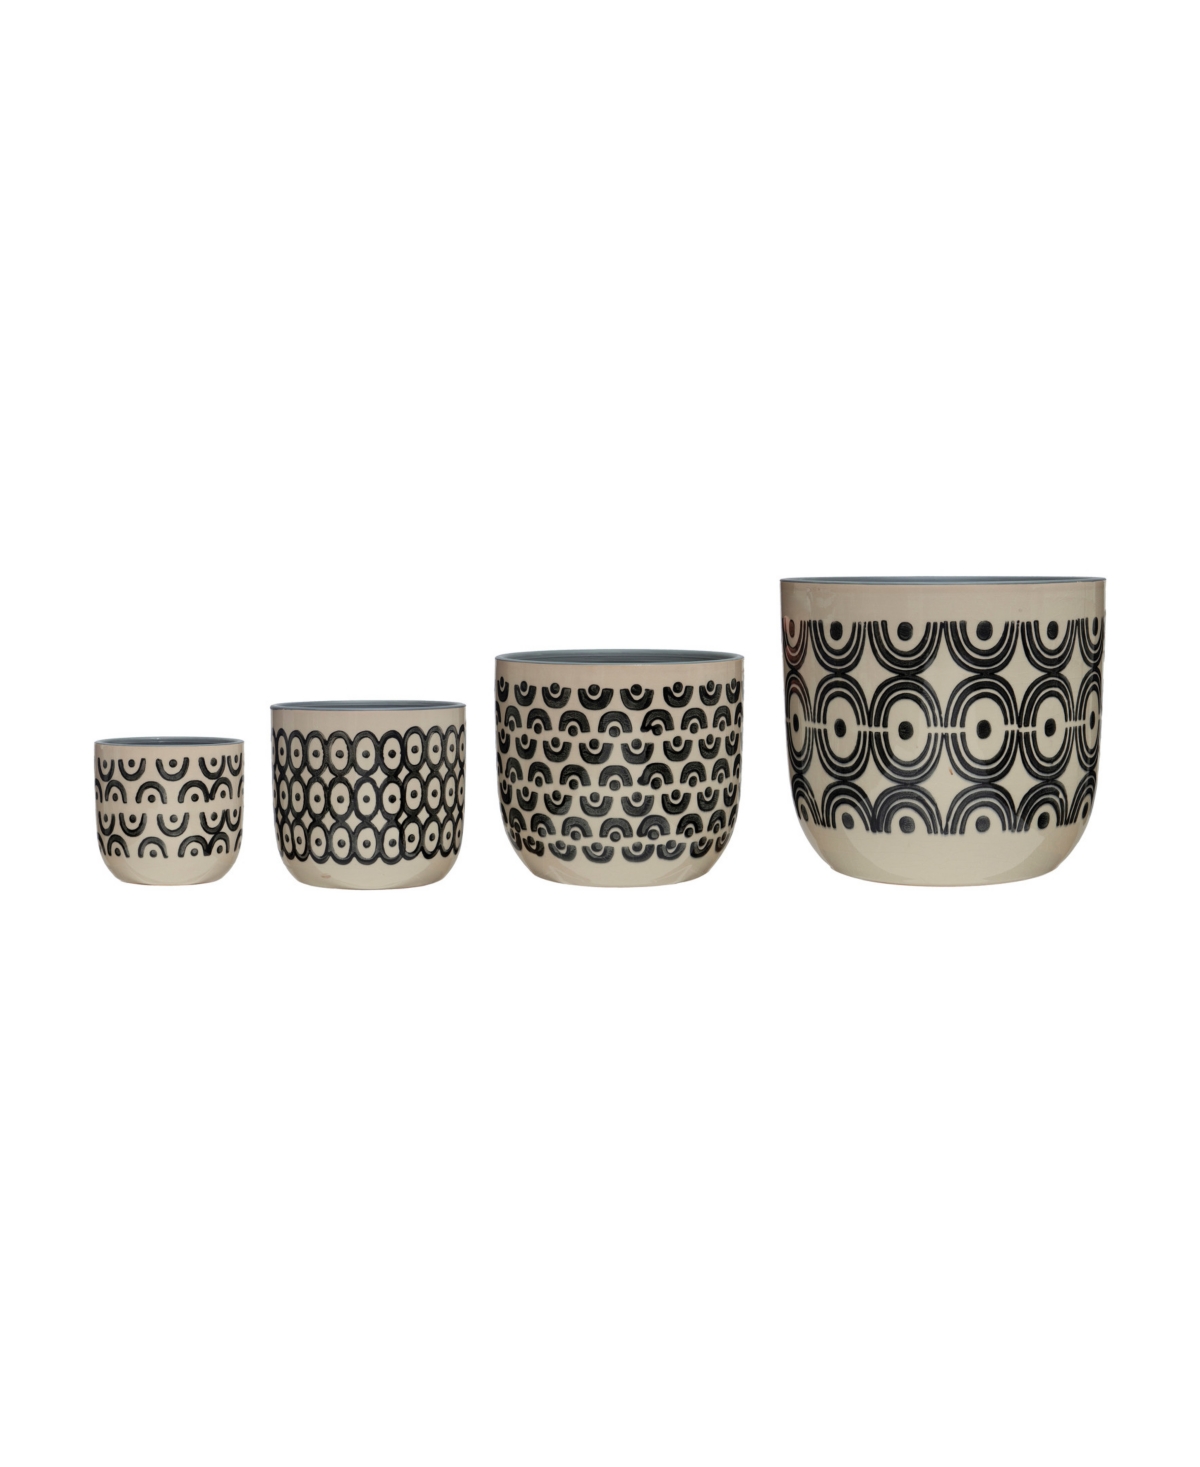 Modern Stoneware Planters with Hand-Painted Geometric Designs - Black